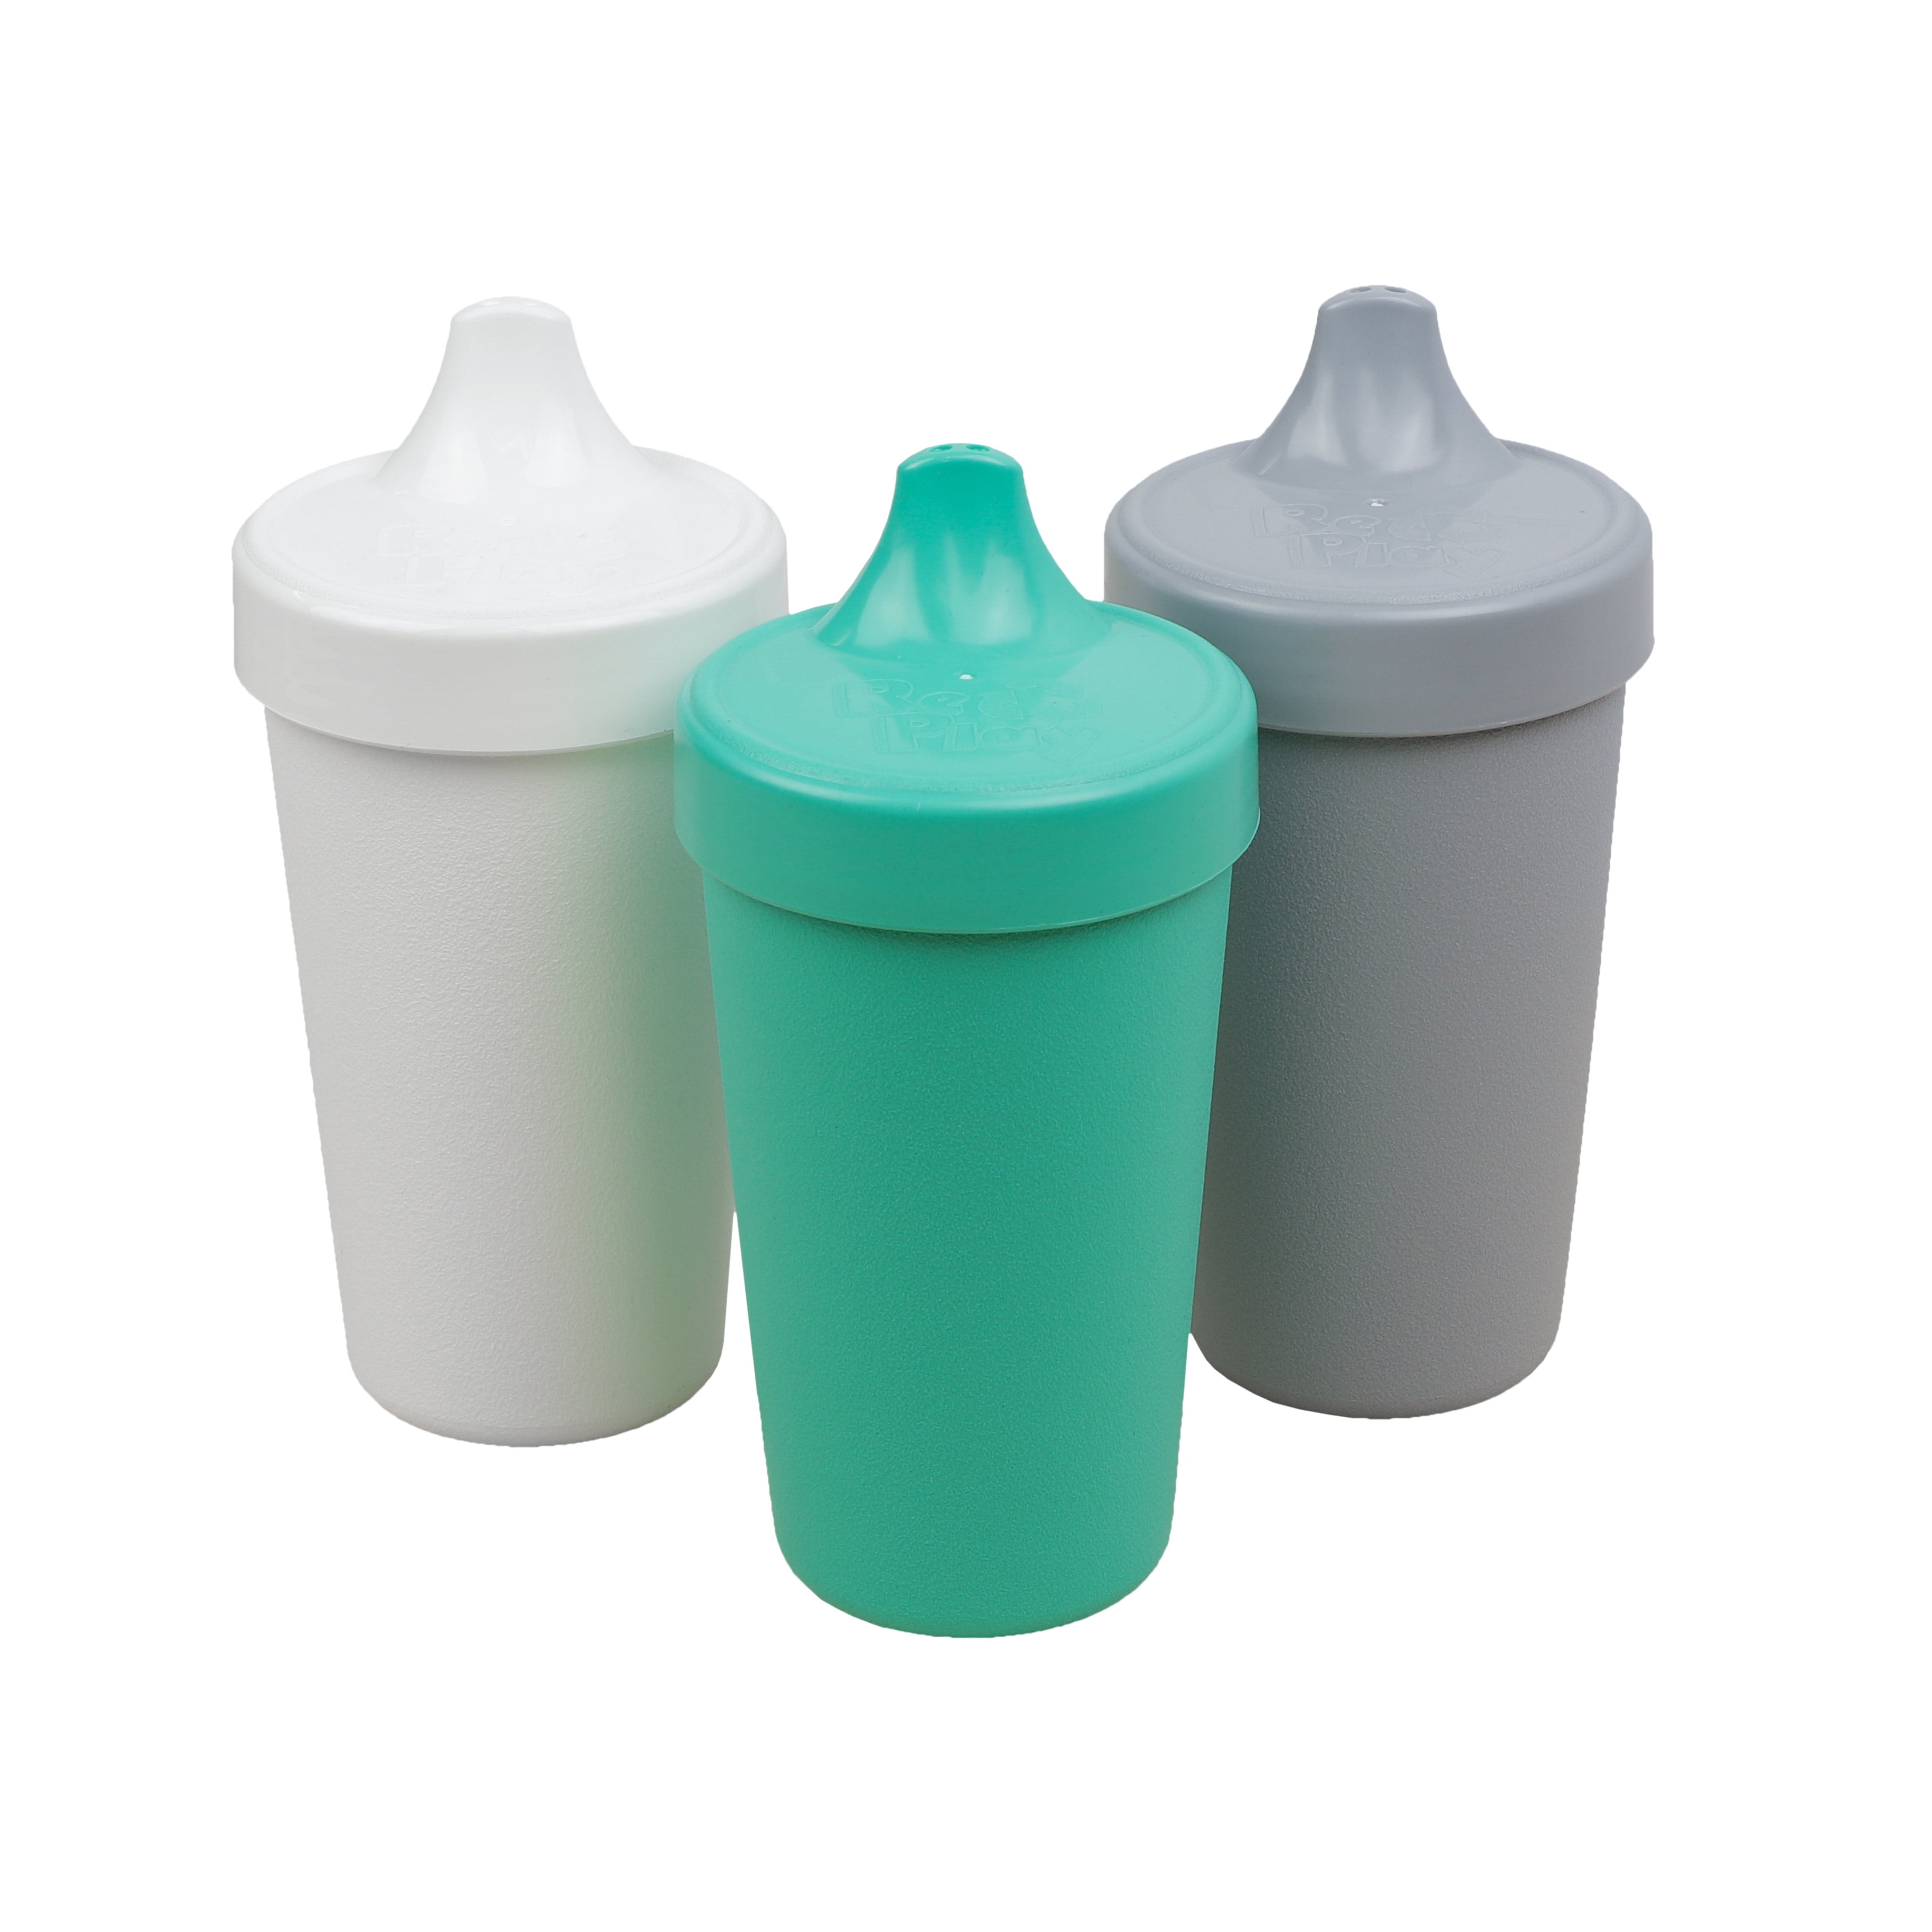 Re Play Made in USA 10 Oz. Sippy Cups for Toddlers (4-pack) Spill Proof  Sippy